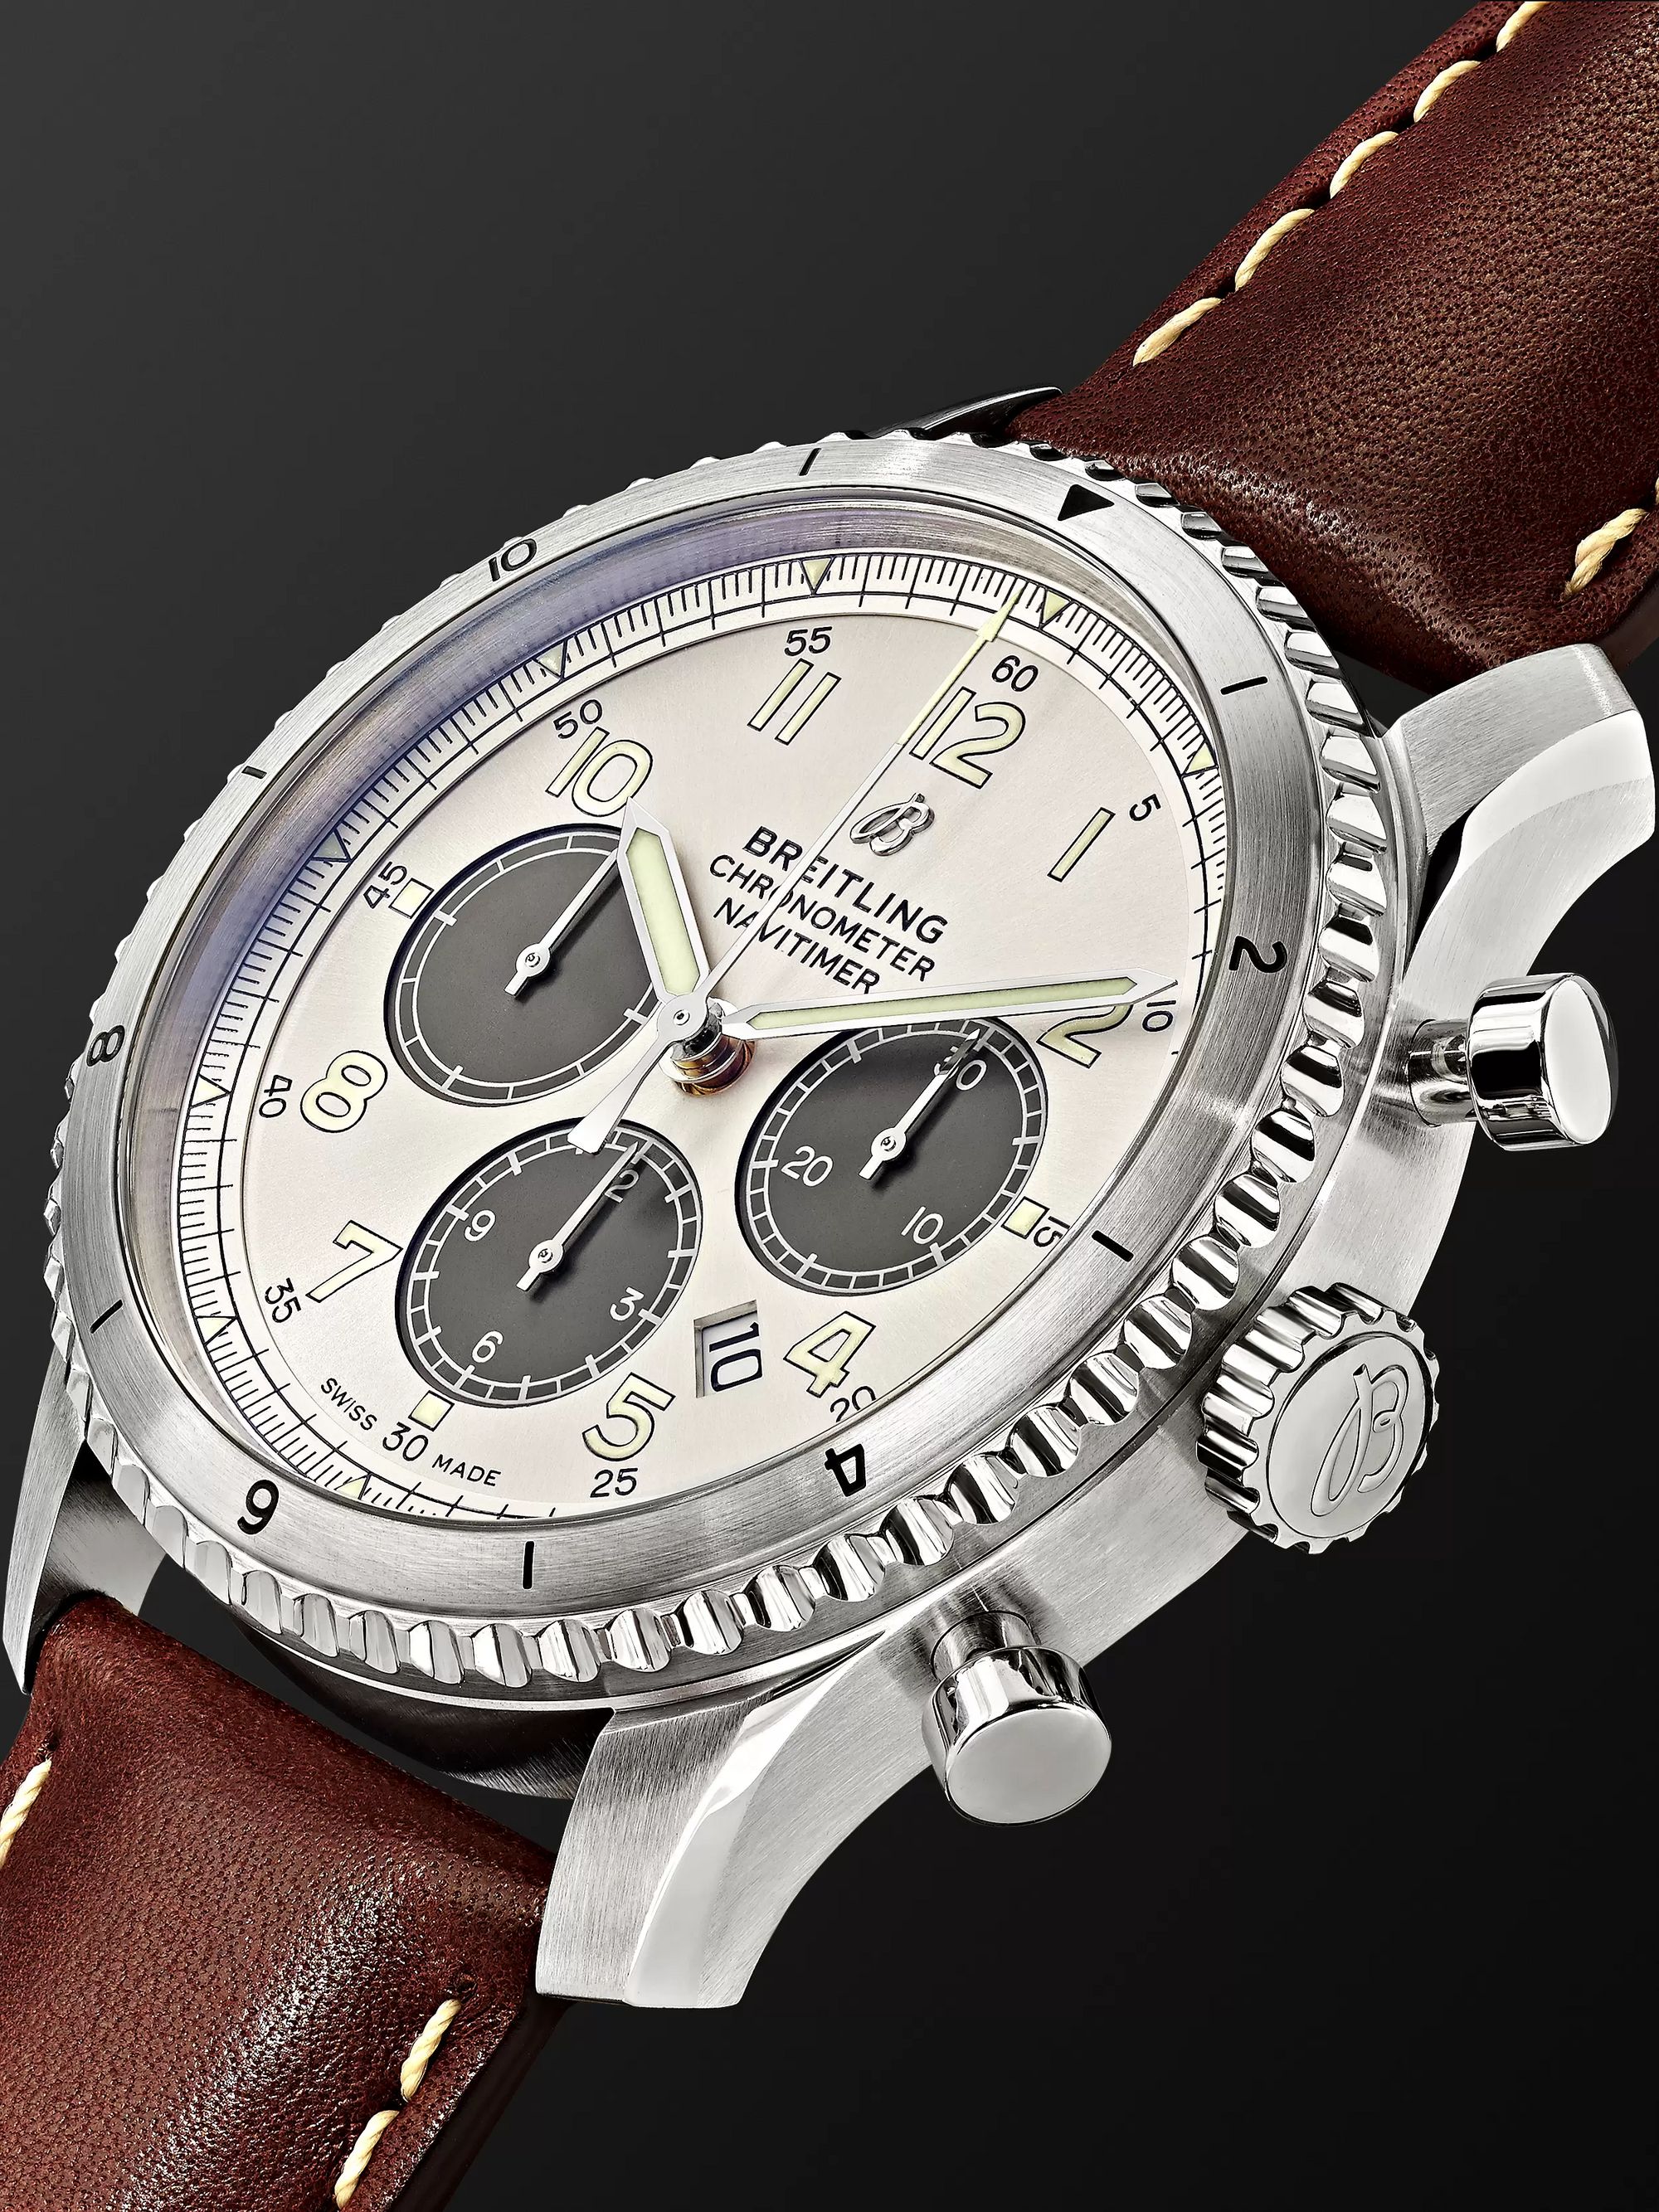 BREITLING Navitimer 8 B01 Automatic Chronograph 43mm Stainless Steel and Leather Watch, Ref. No. AB01171A1G1P1